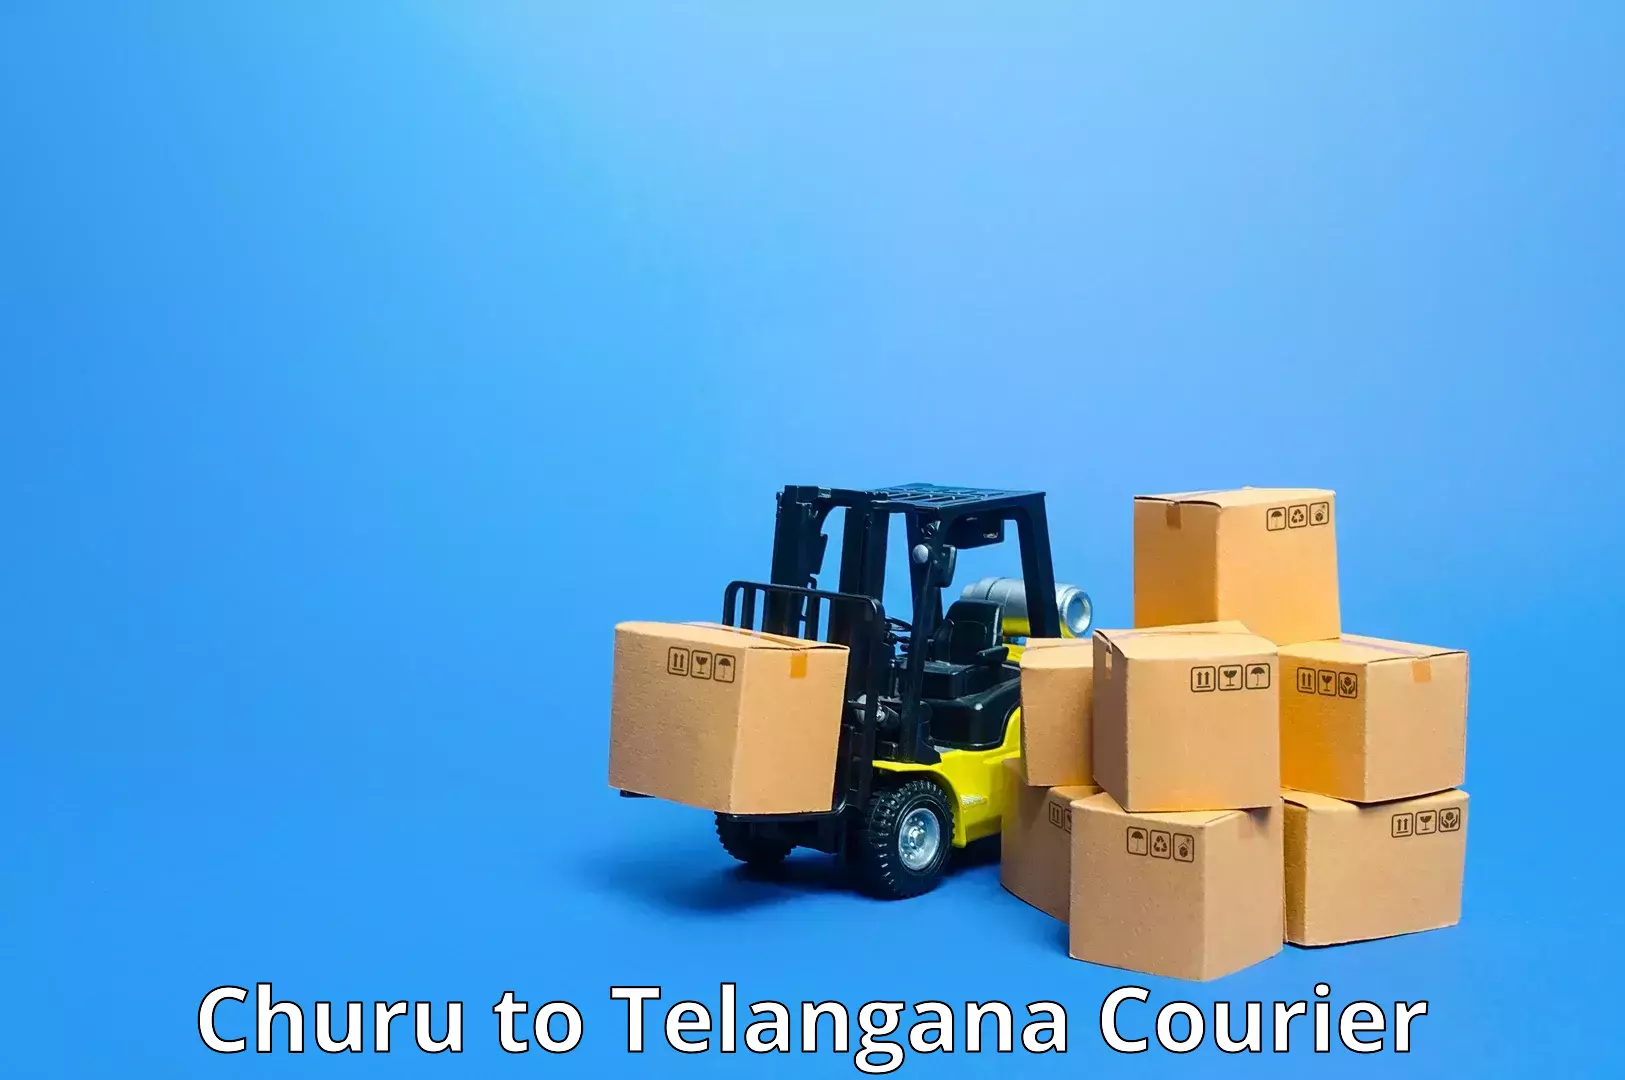 High-speed delivery Churu to Secunderabad